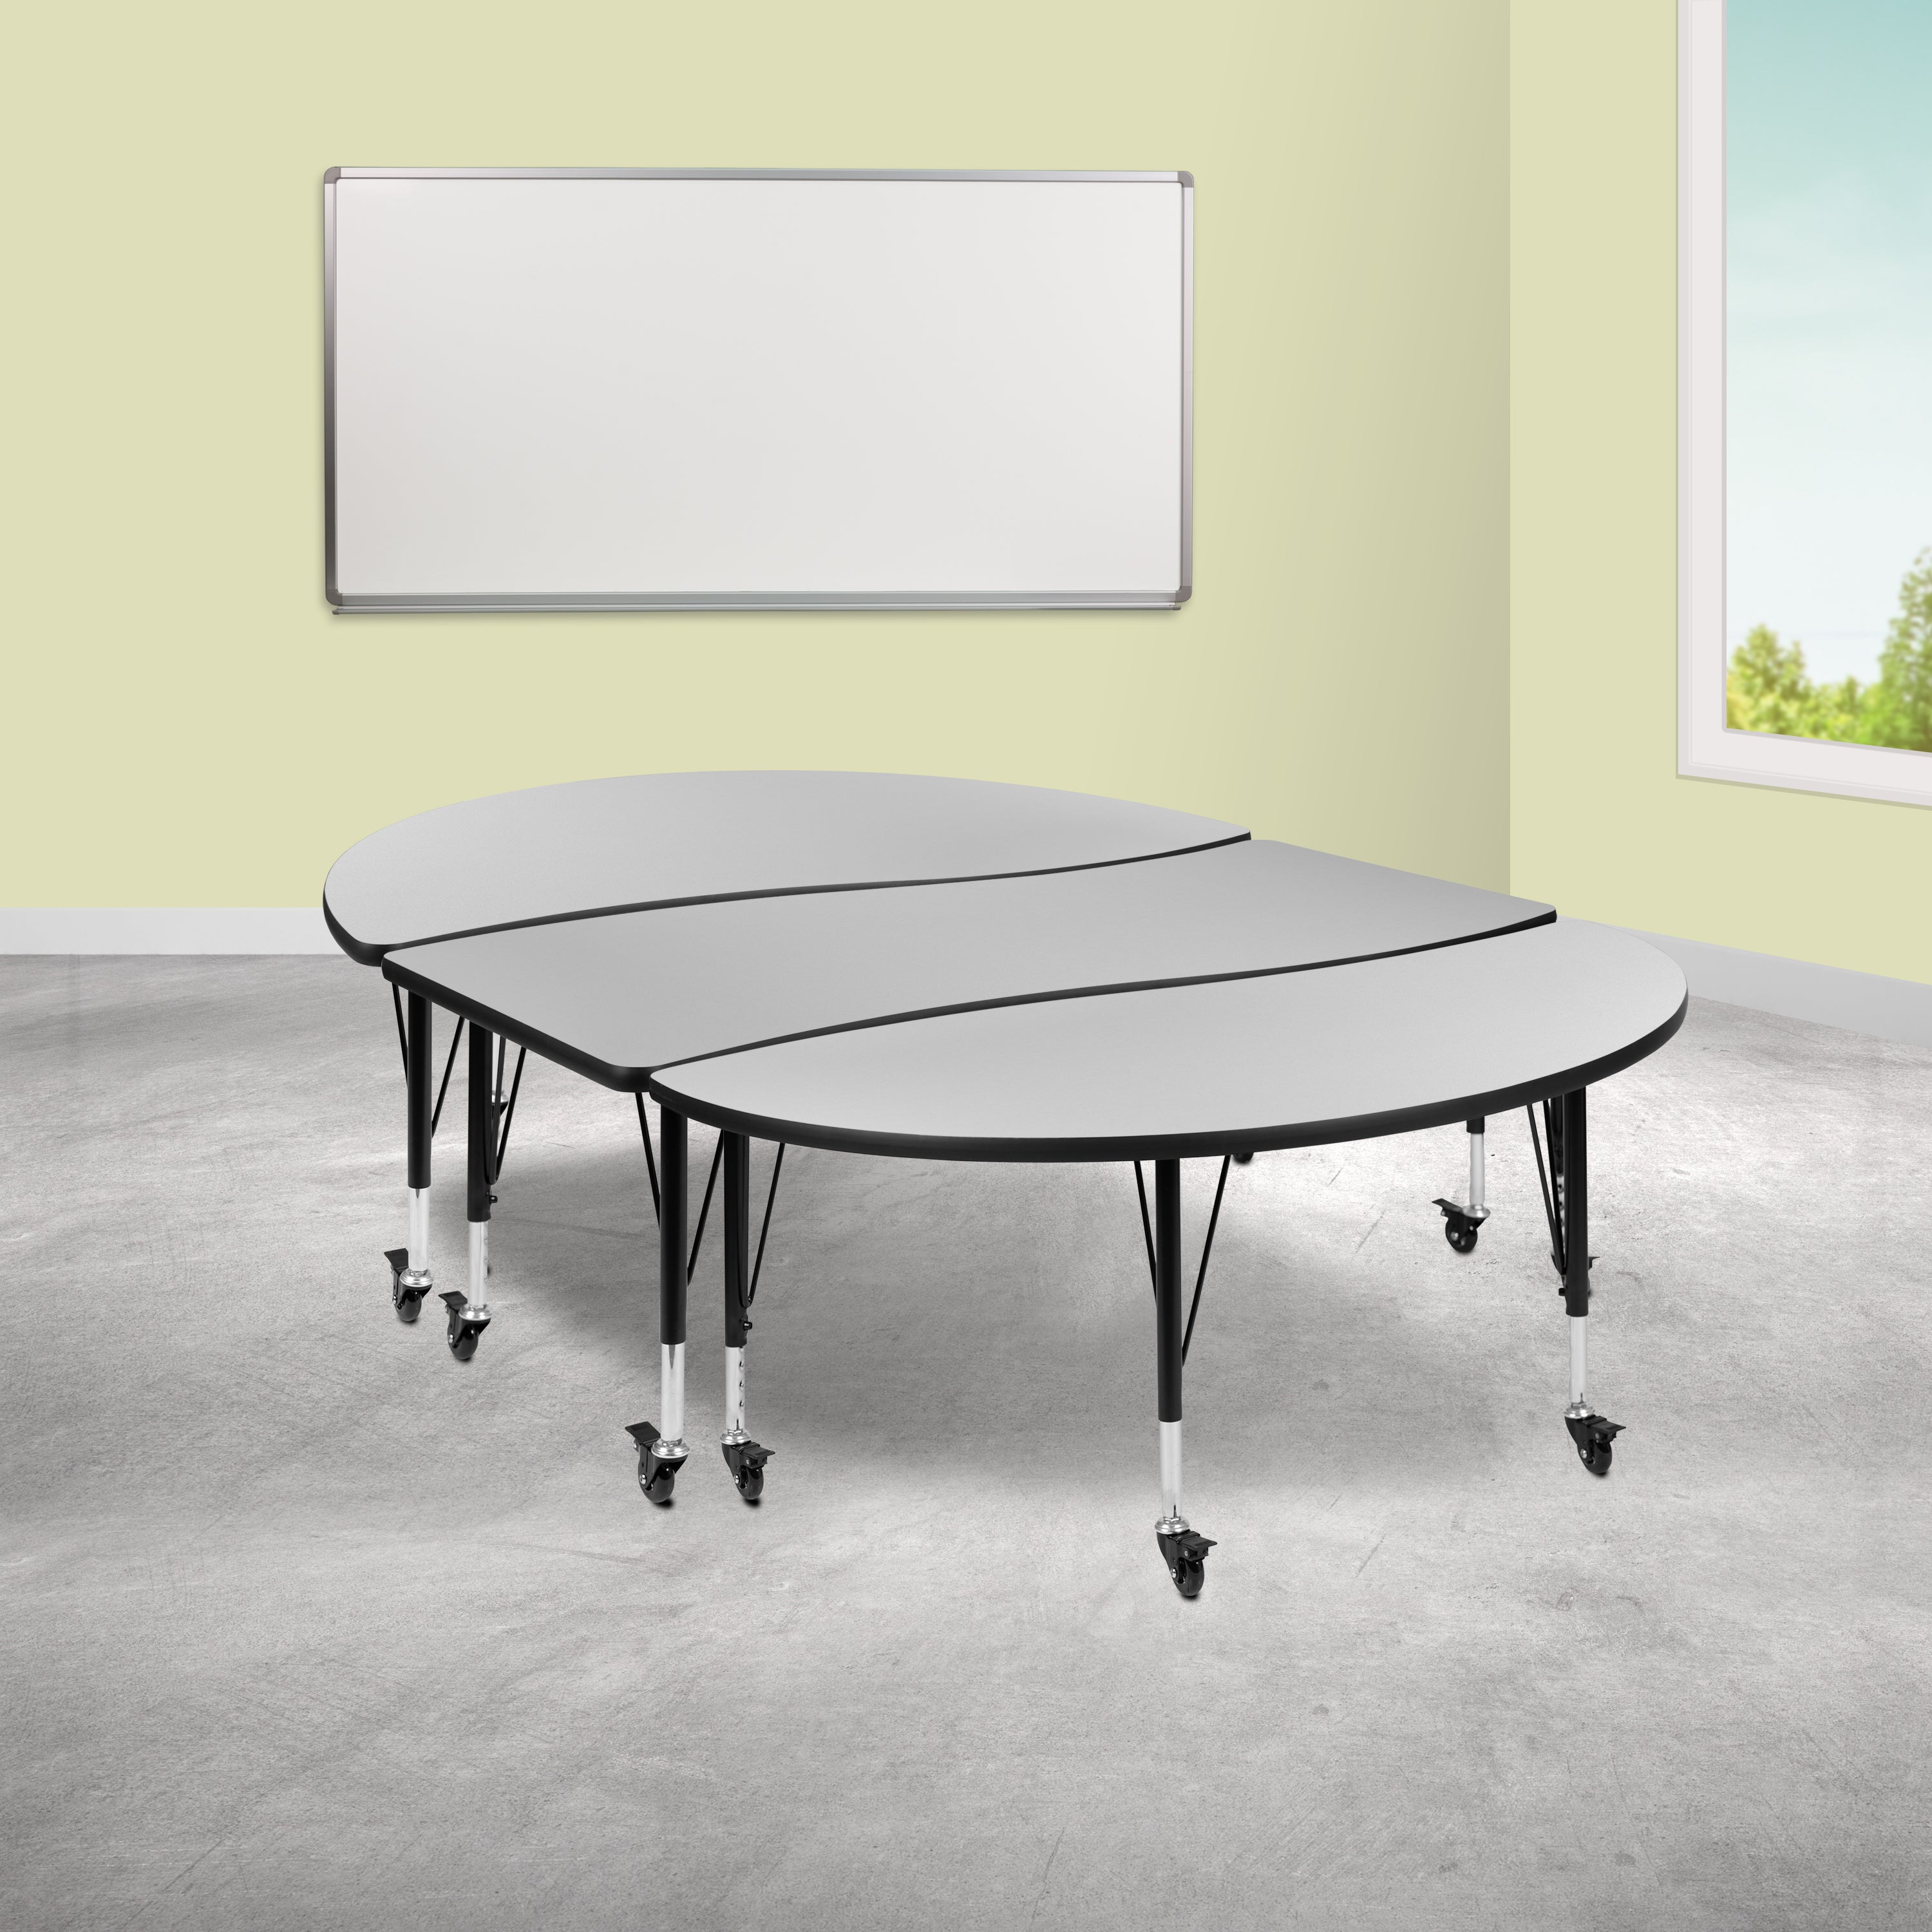 3 Piece Mobile 86" Oval Wave Flexible Grey Thermal Laminate Activity Table Set - Height Adjustable Short Legs-Collaborative Activity Table Set-Flash Furniture-Wall2Wall Furnishings